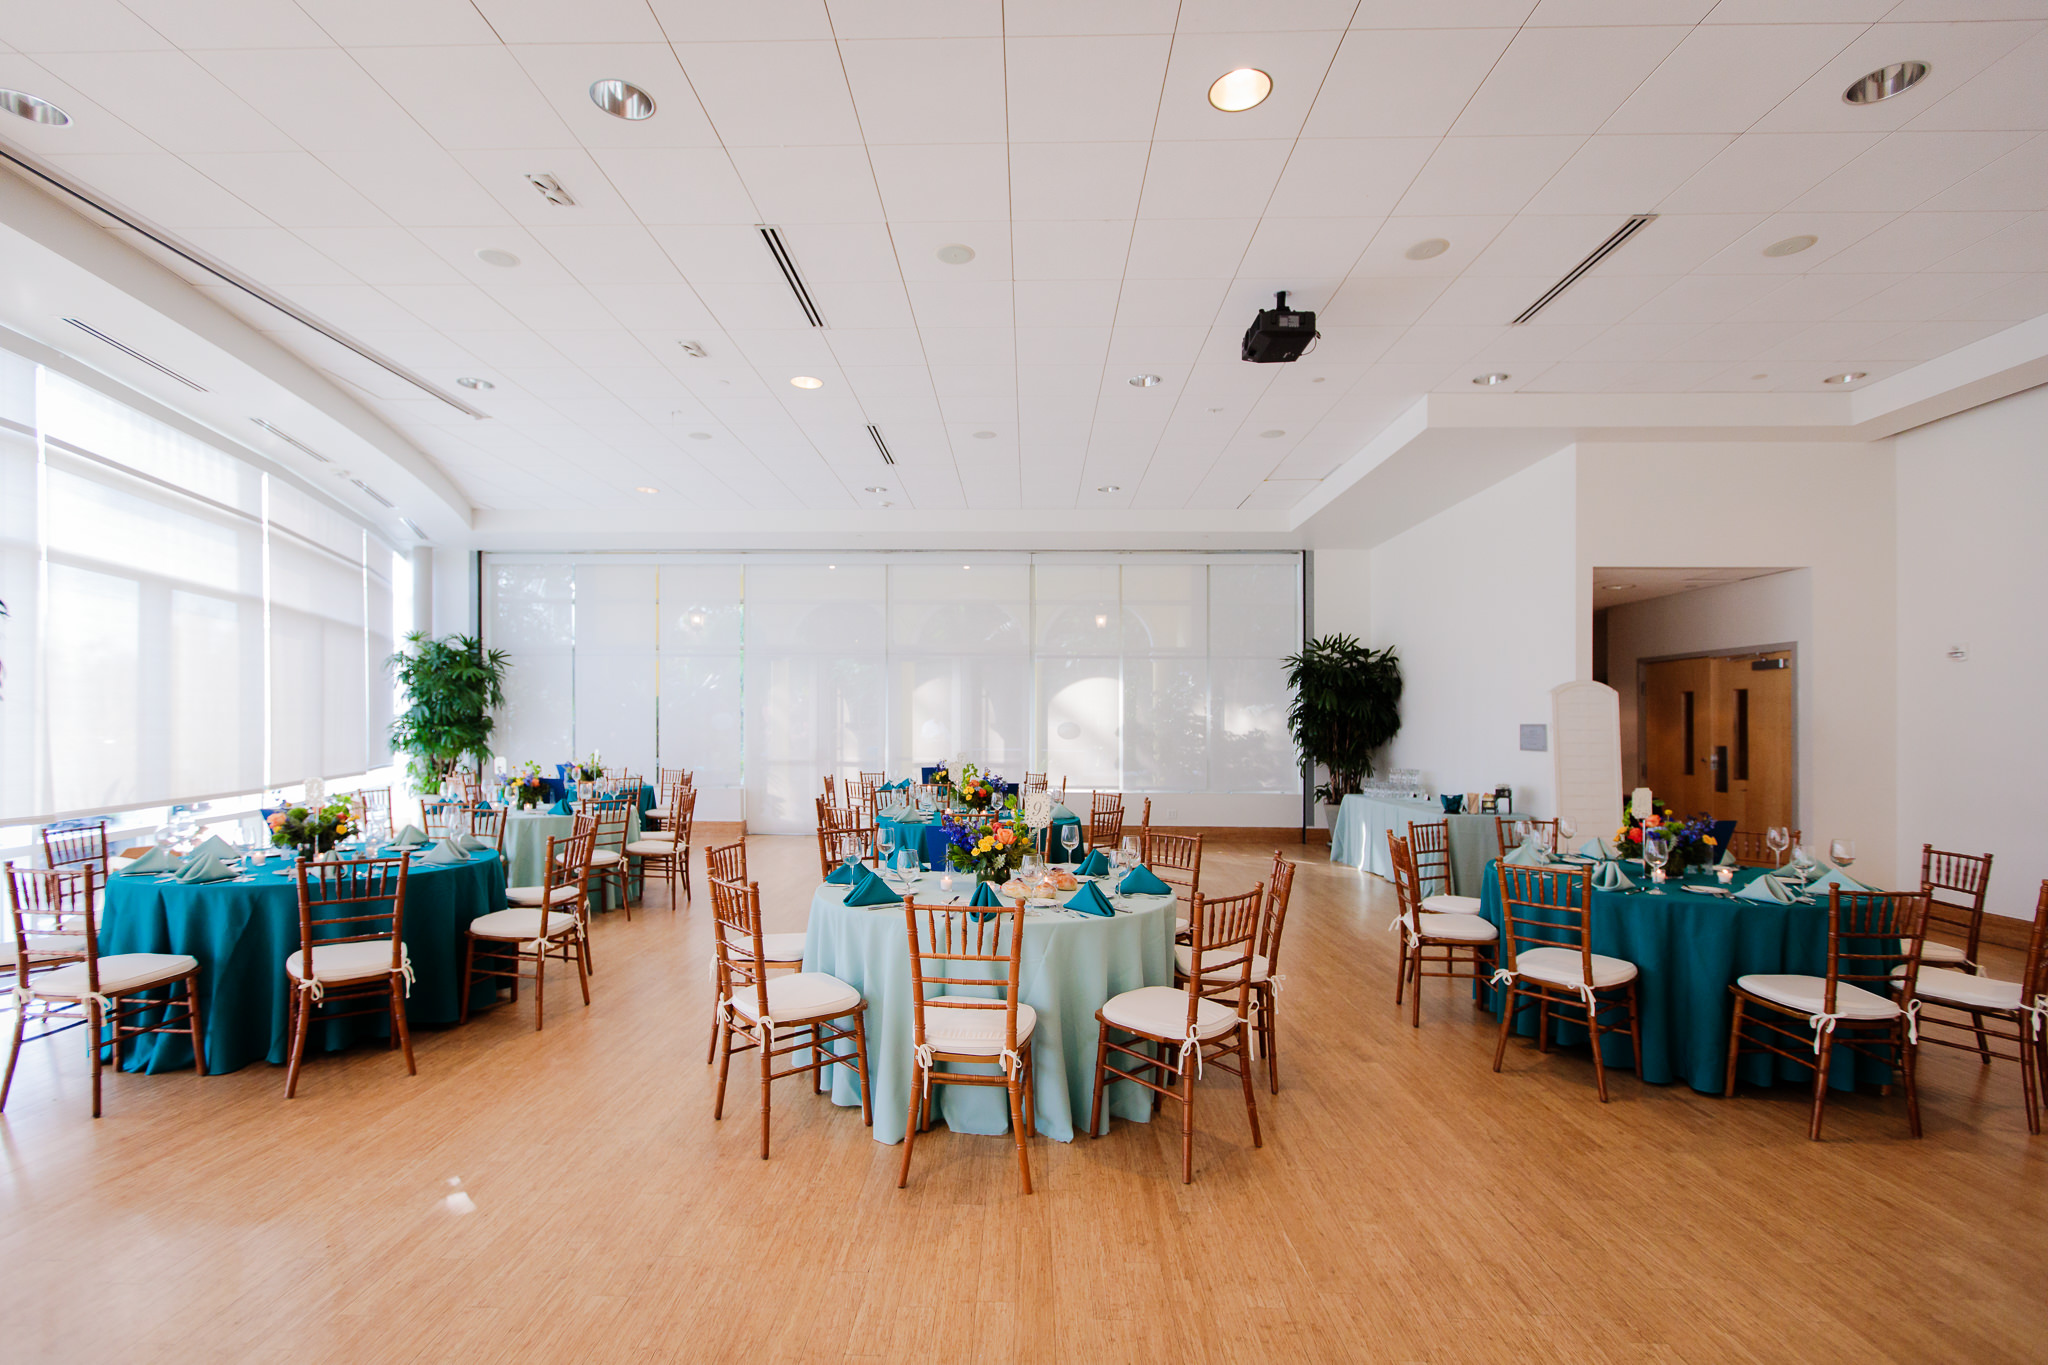 Phipps Conservatory's special events hall decorated for a colorful summer wedding